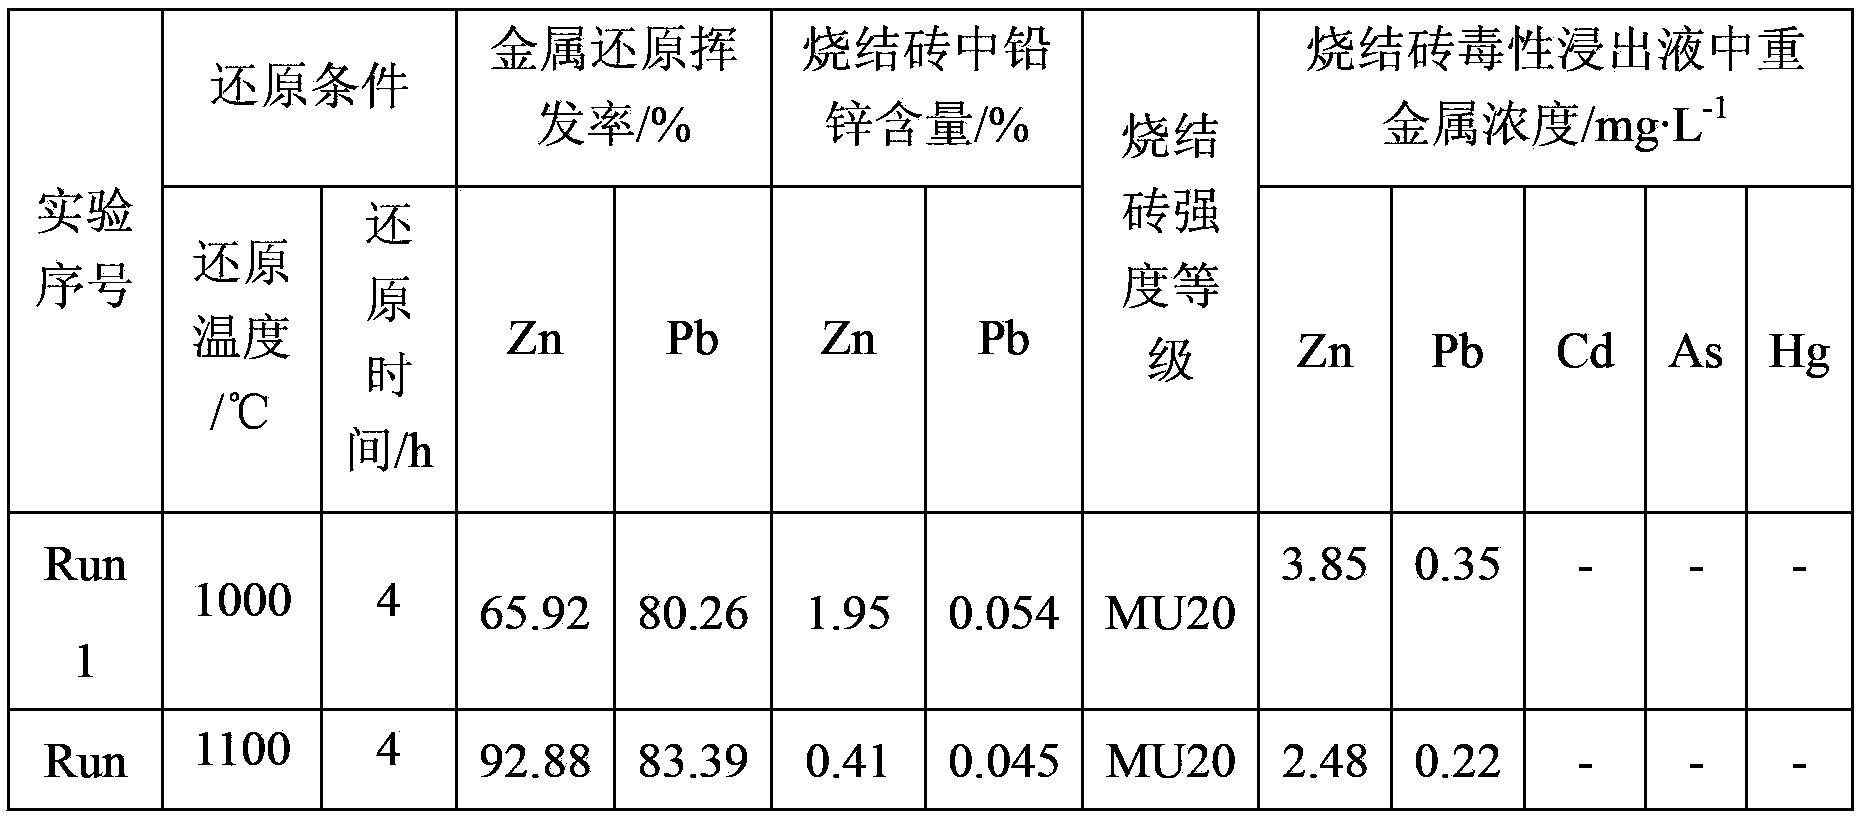 Recycling method for zinc-containing waste residue and urban domestic sludge